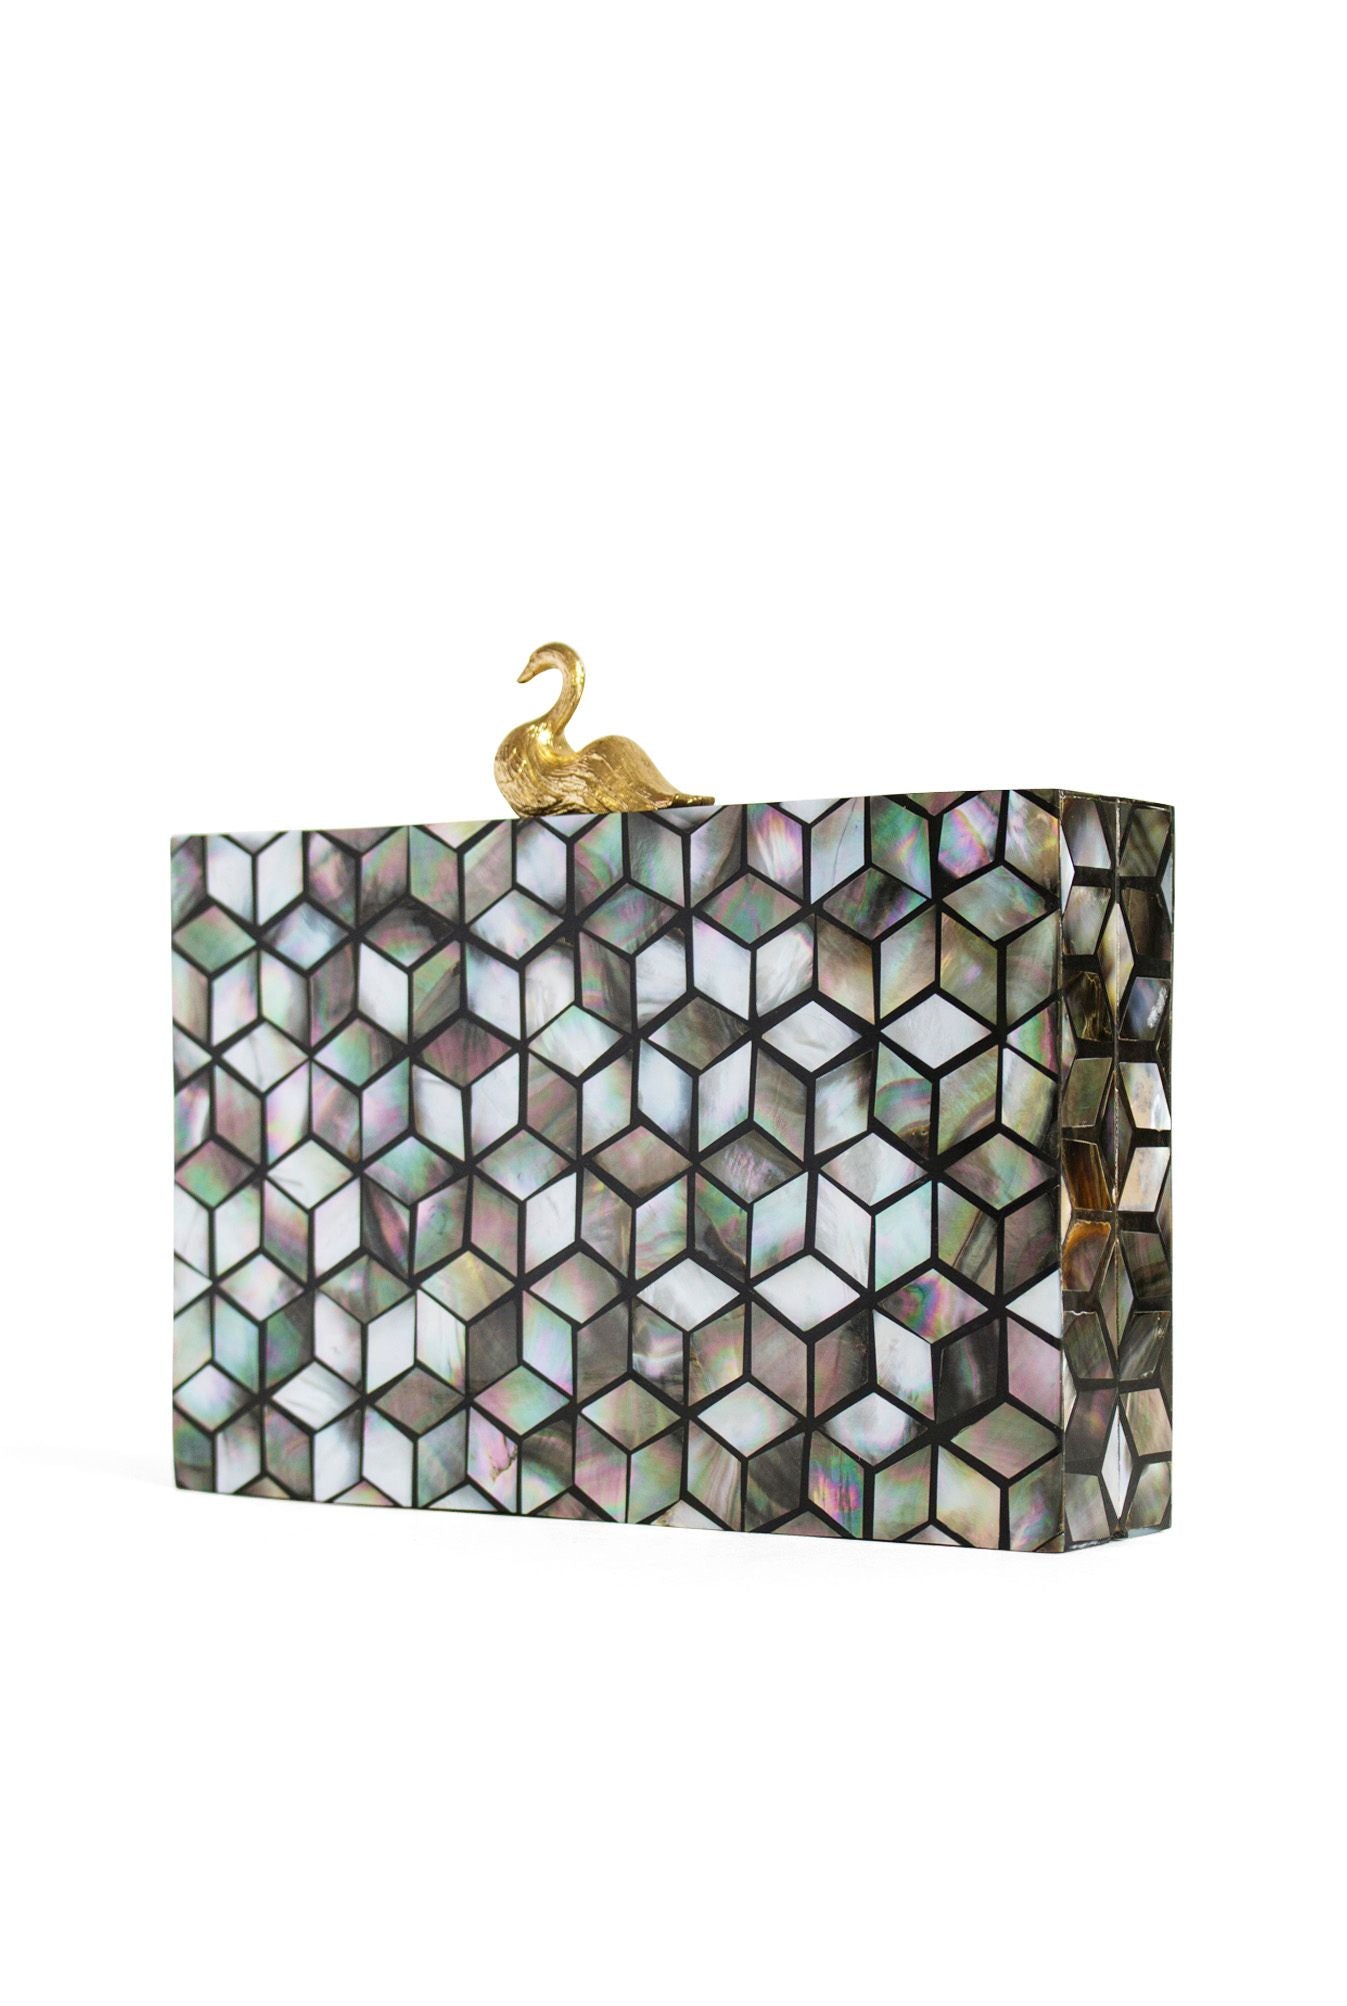 Mother-of Pearl Shell Evening Bag By Marjorie Bloom Collection - S & K Ltd.